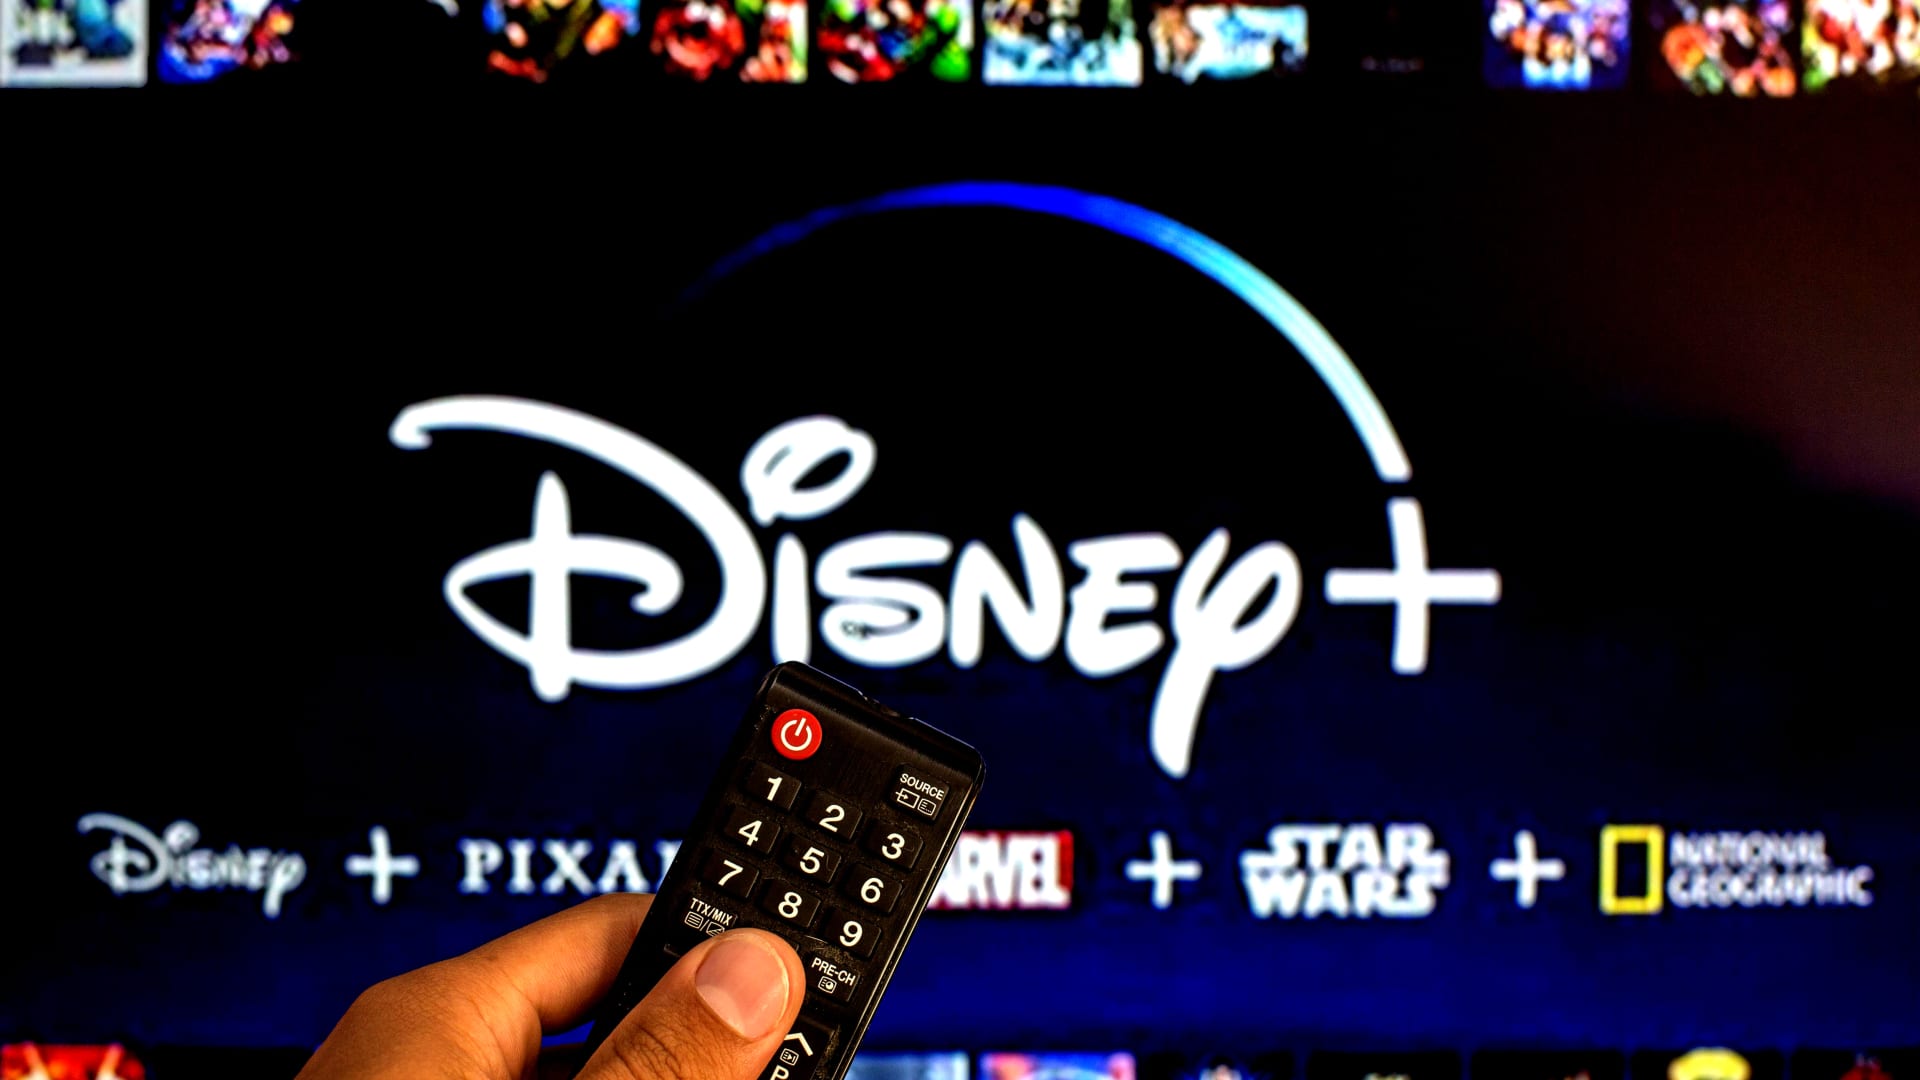 Disney reports earnings after the bell. Here’s what to expect